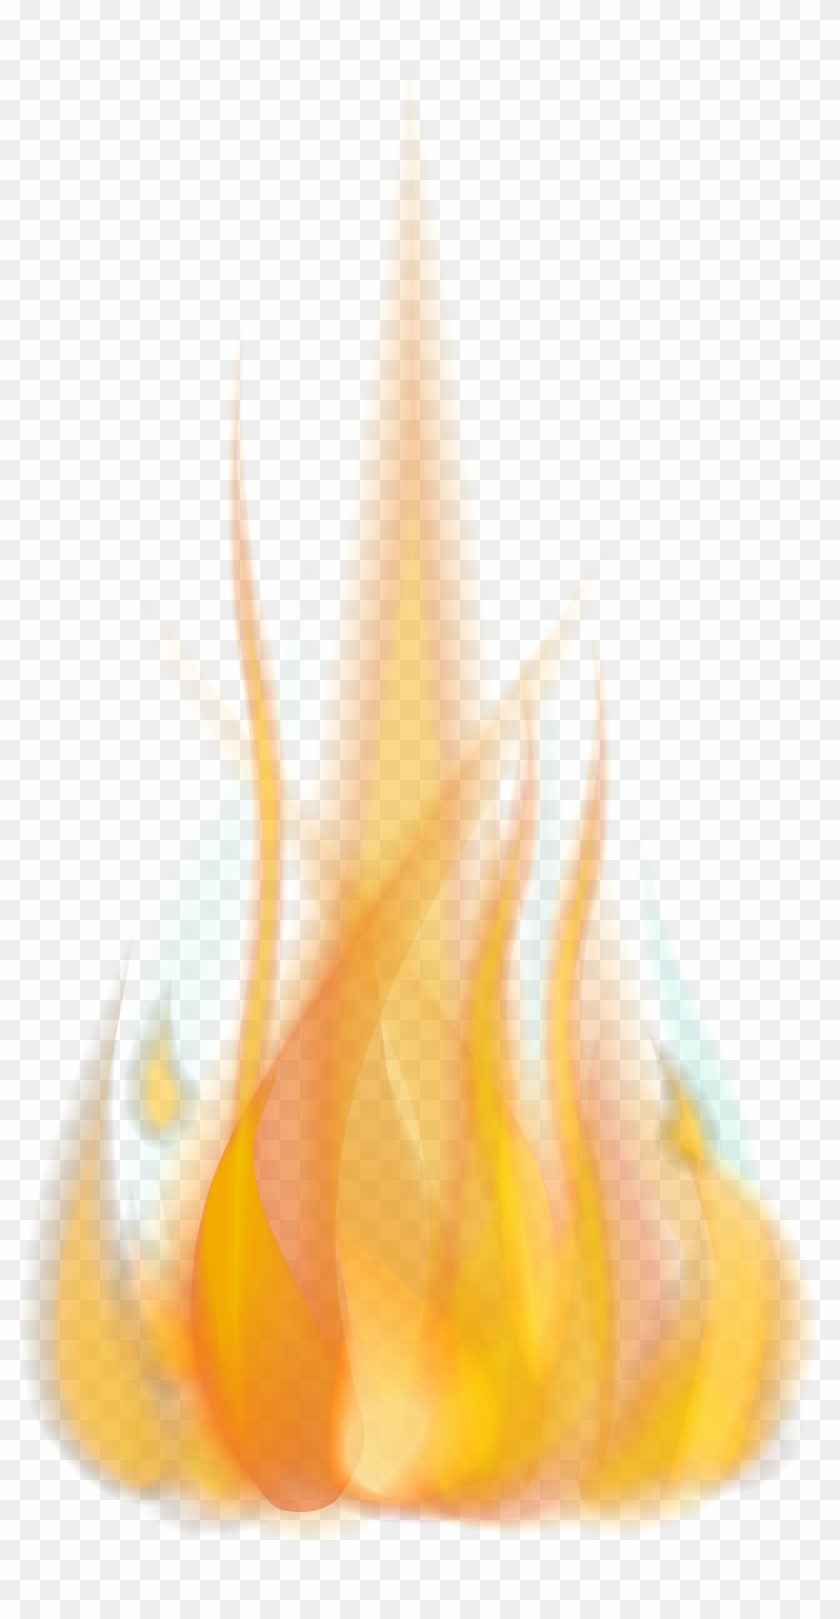 Fire Flame Png Clip Art Image - Fire Flame Png Transparent